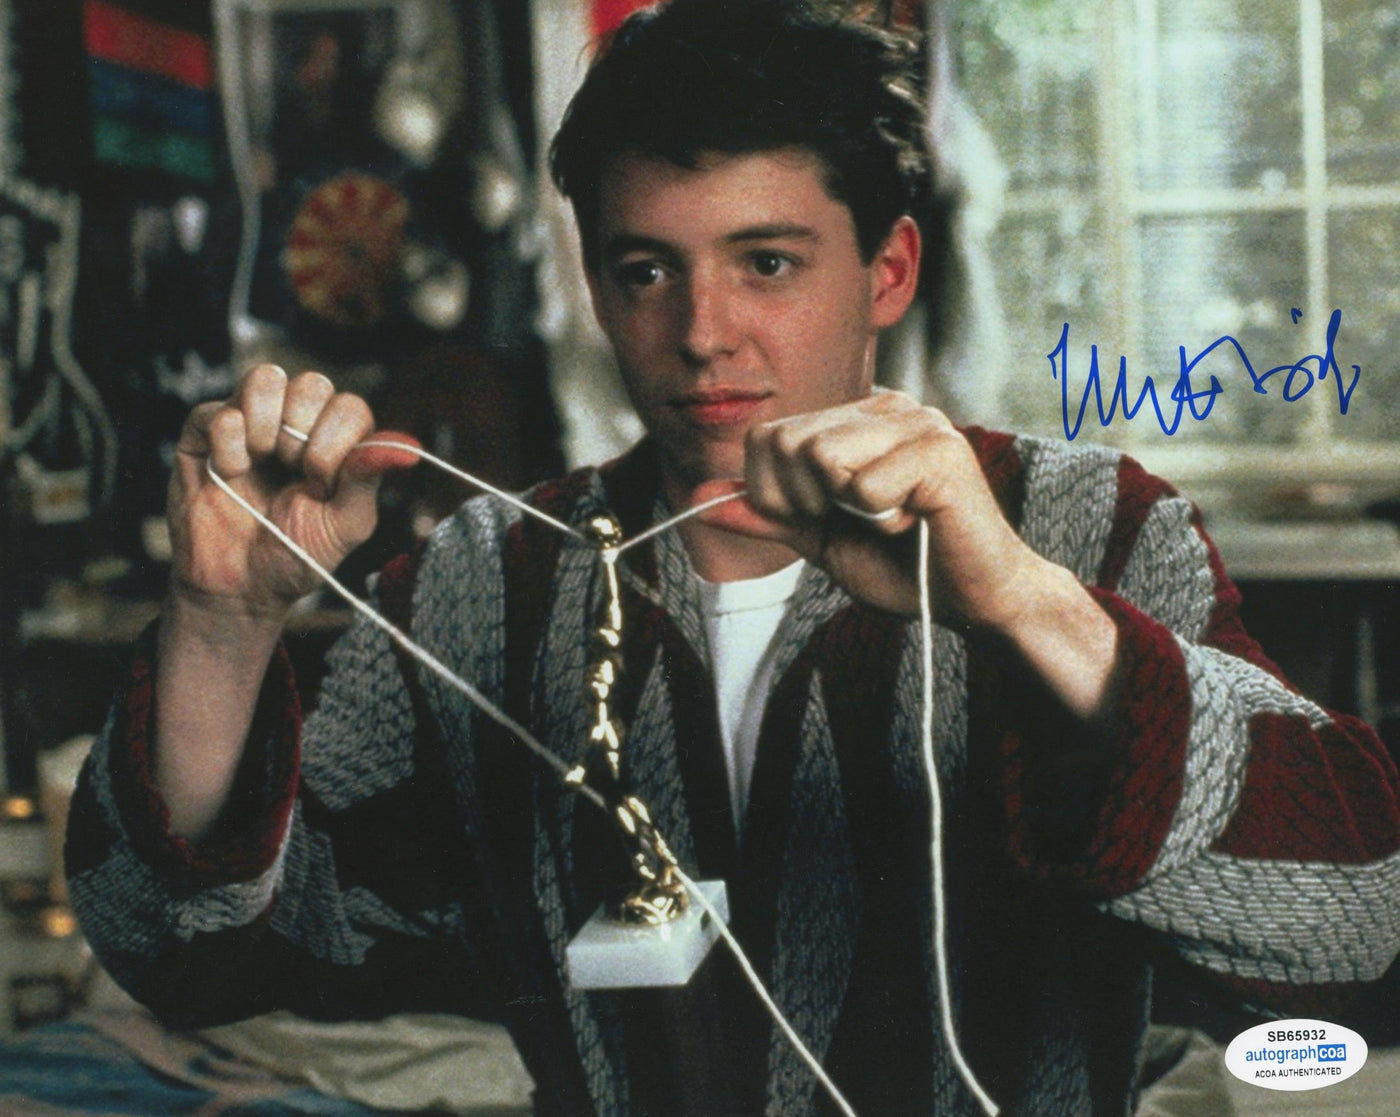 Matthew Broderick Signed 8x10 Photo Ferris Bueller's Day Off Autographed ACOA #6